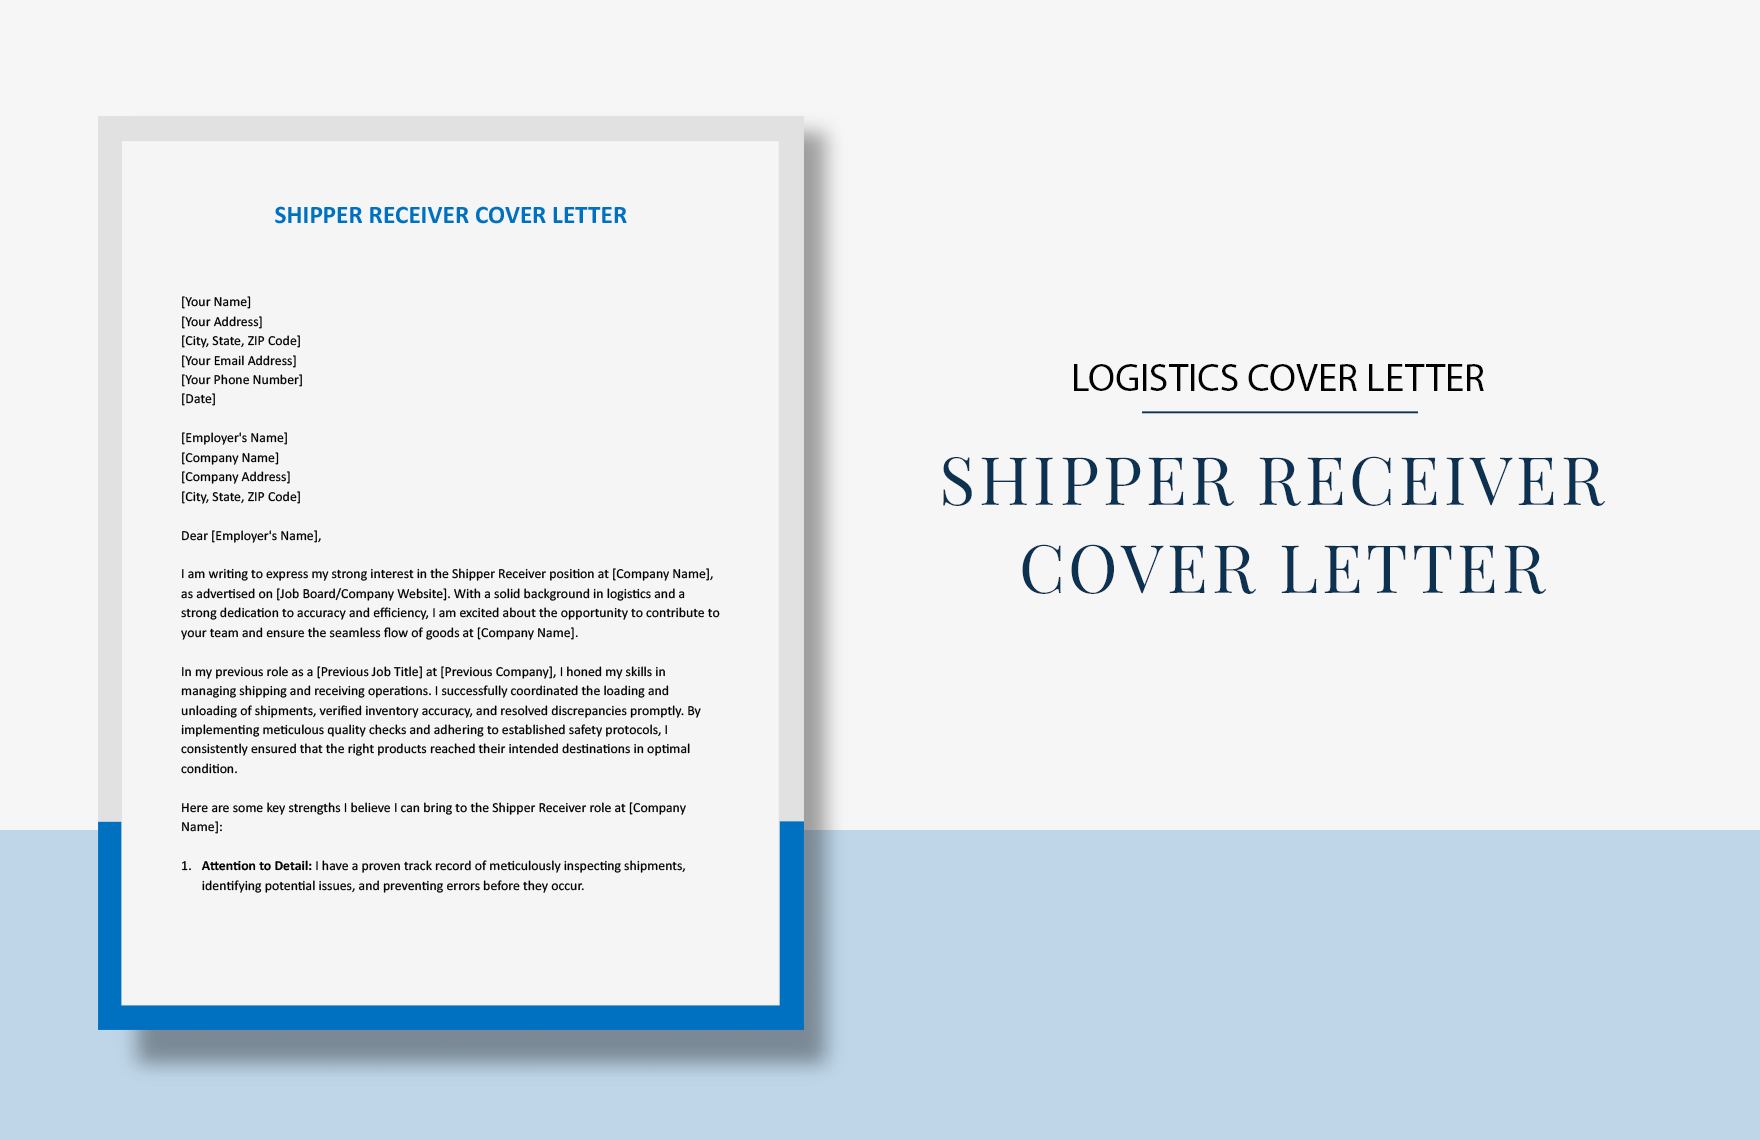 Shipper Receiver Cover Letter in Word, Google Docs, Apple Pages